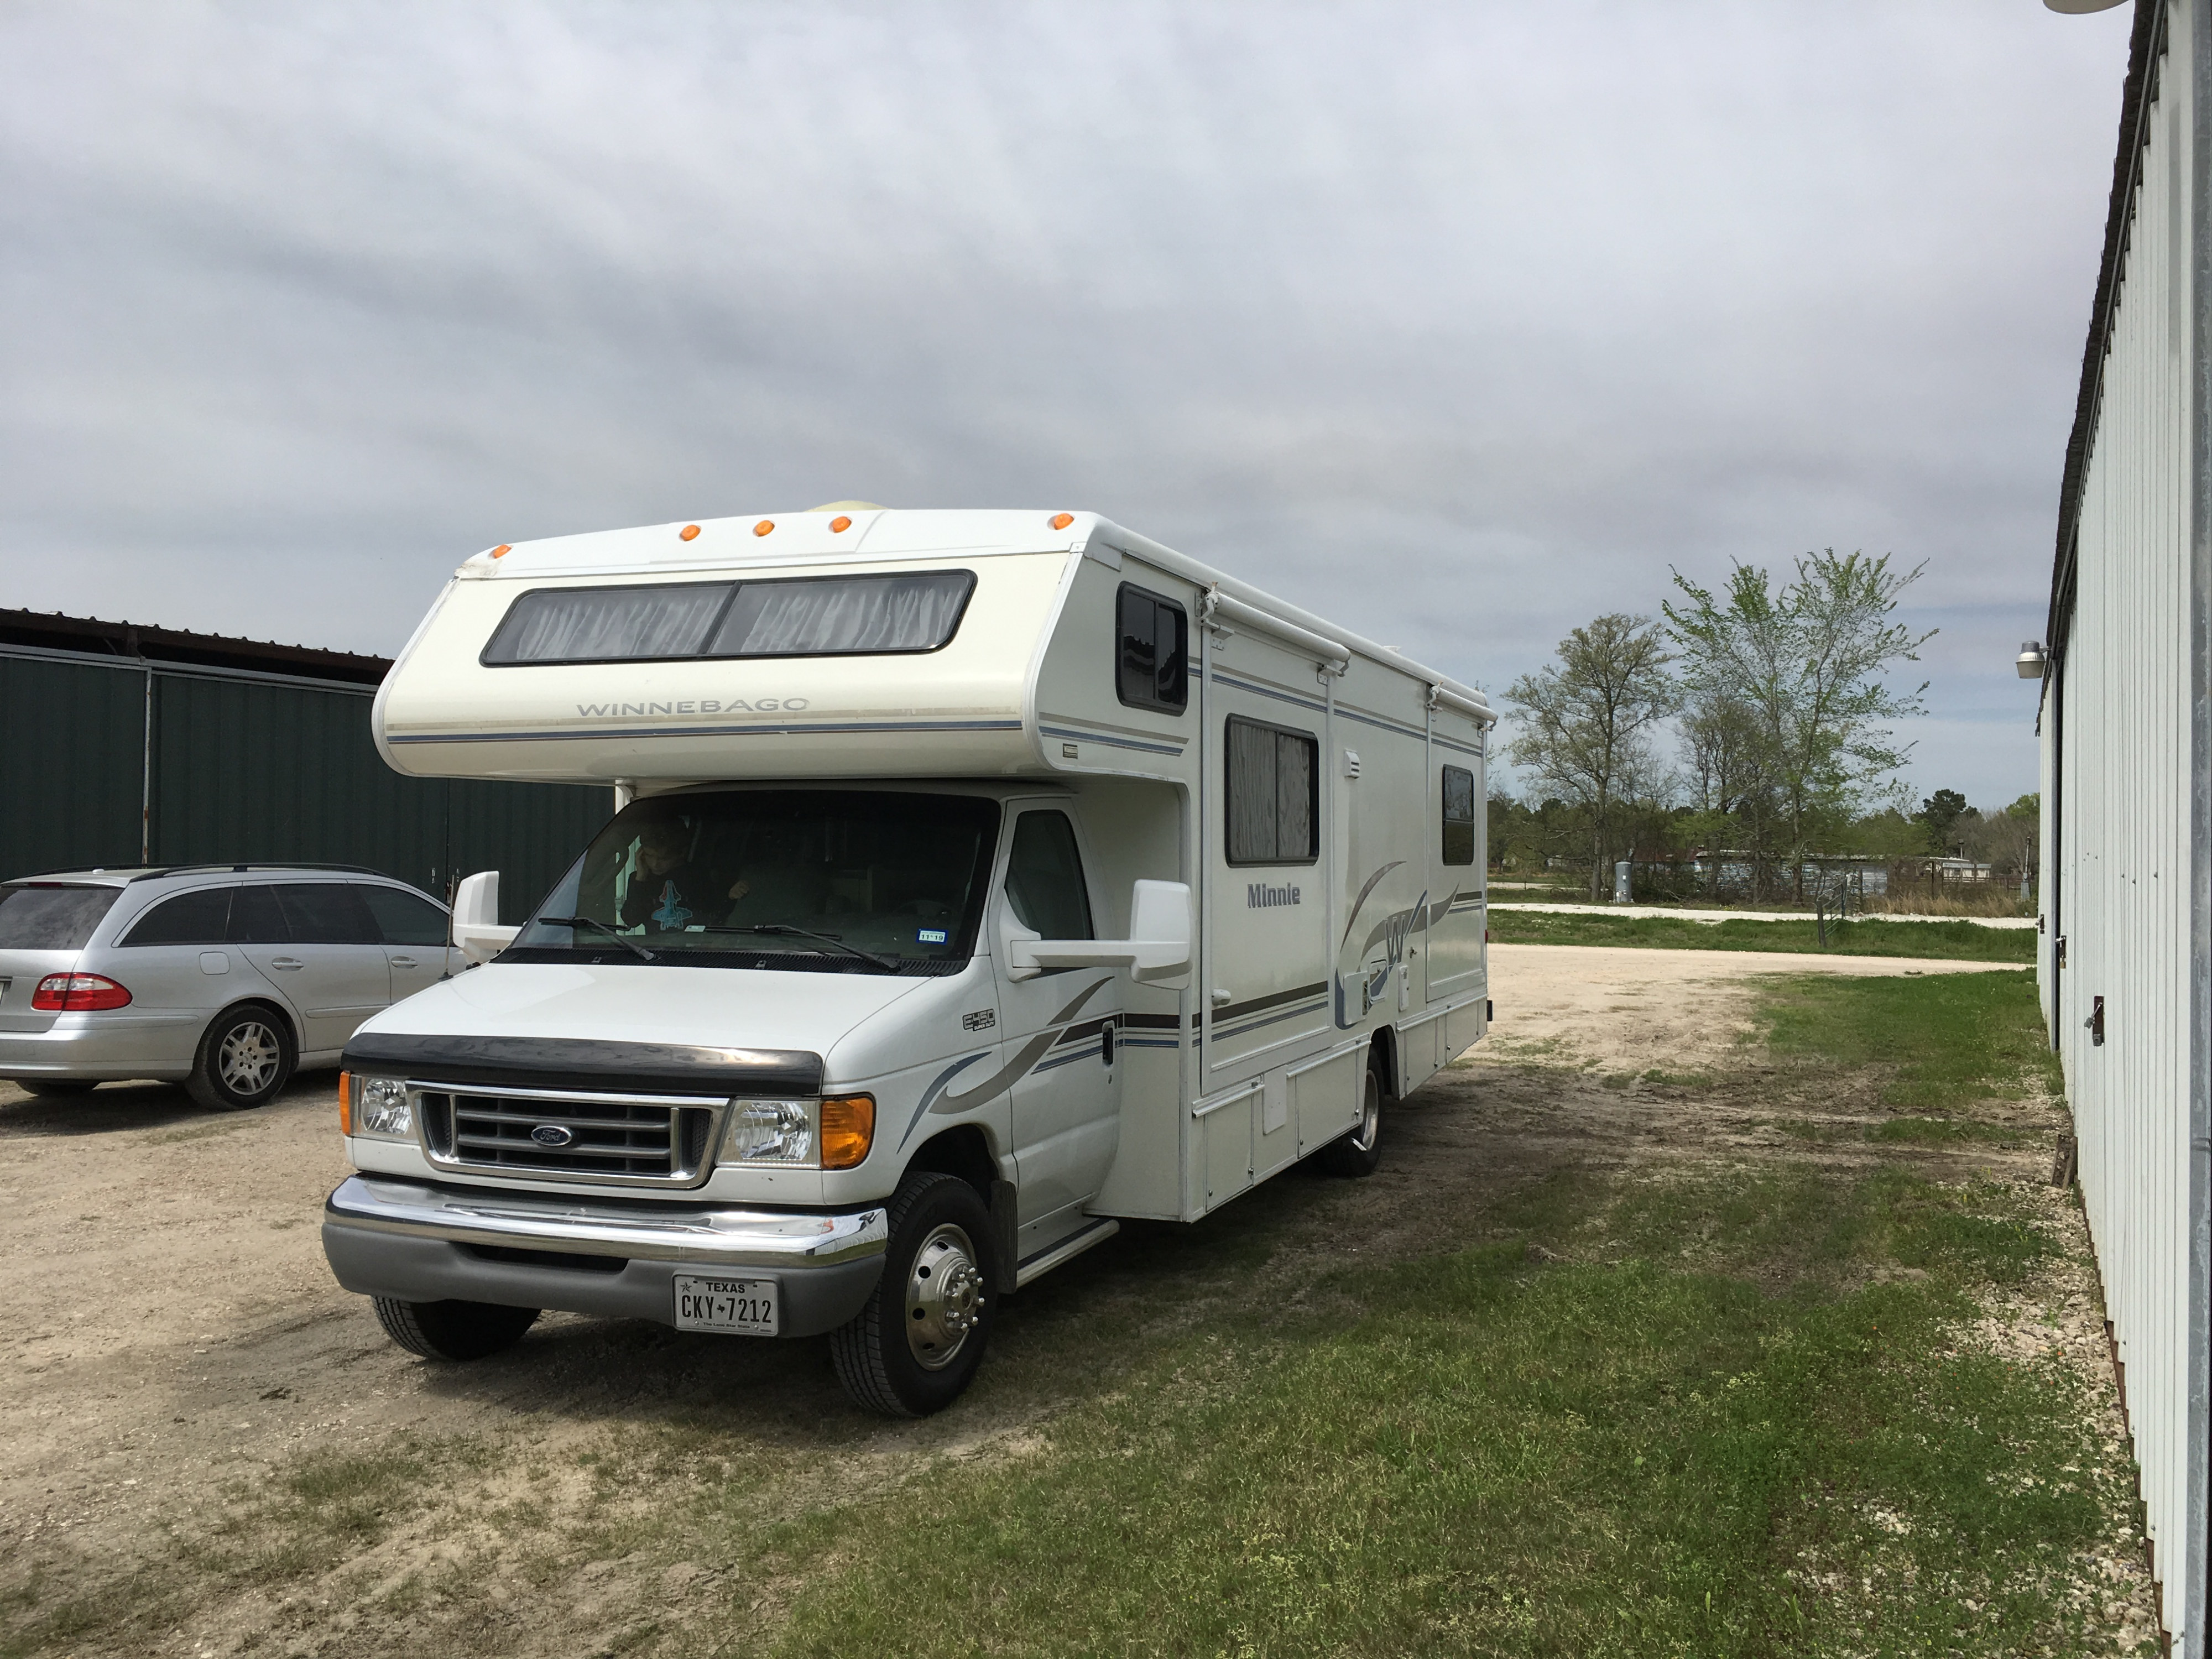 Top 25 Tall Timbers Campground Rv Rentals And Motorhome Rentals